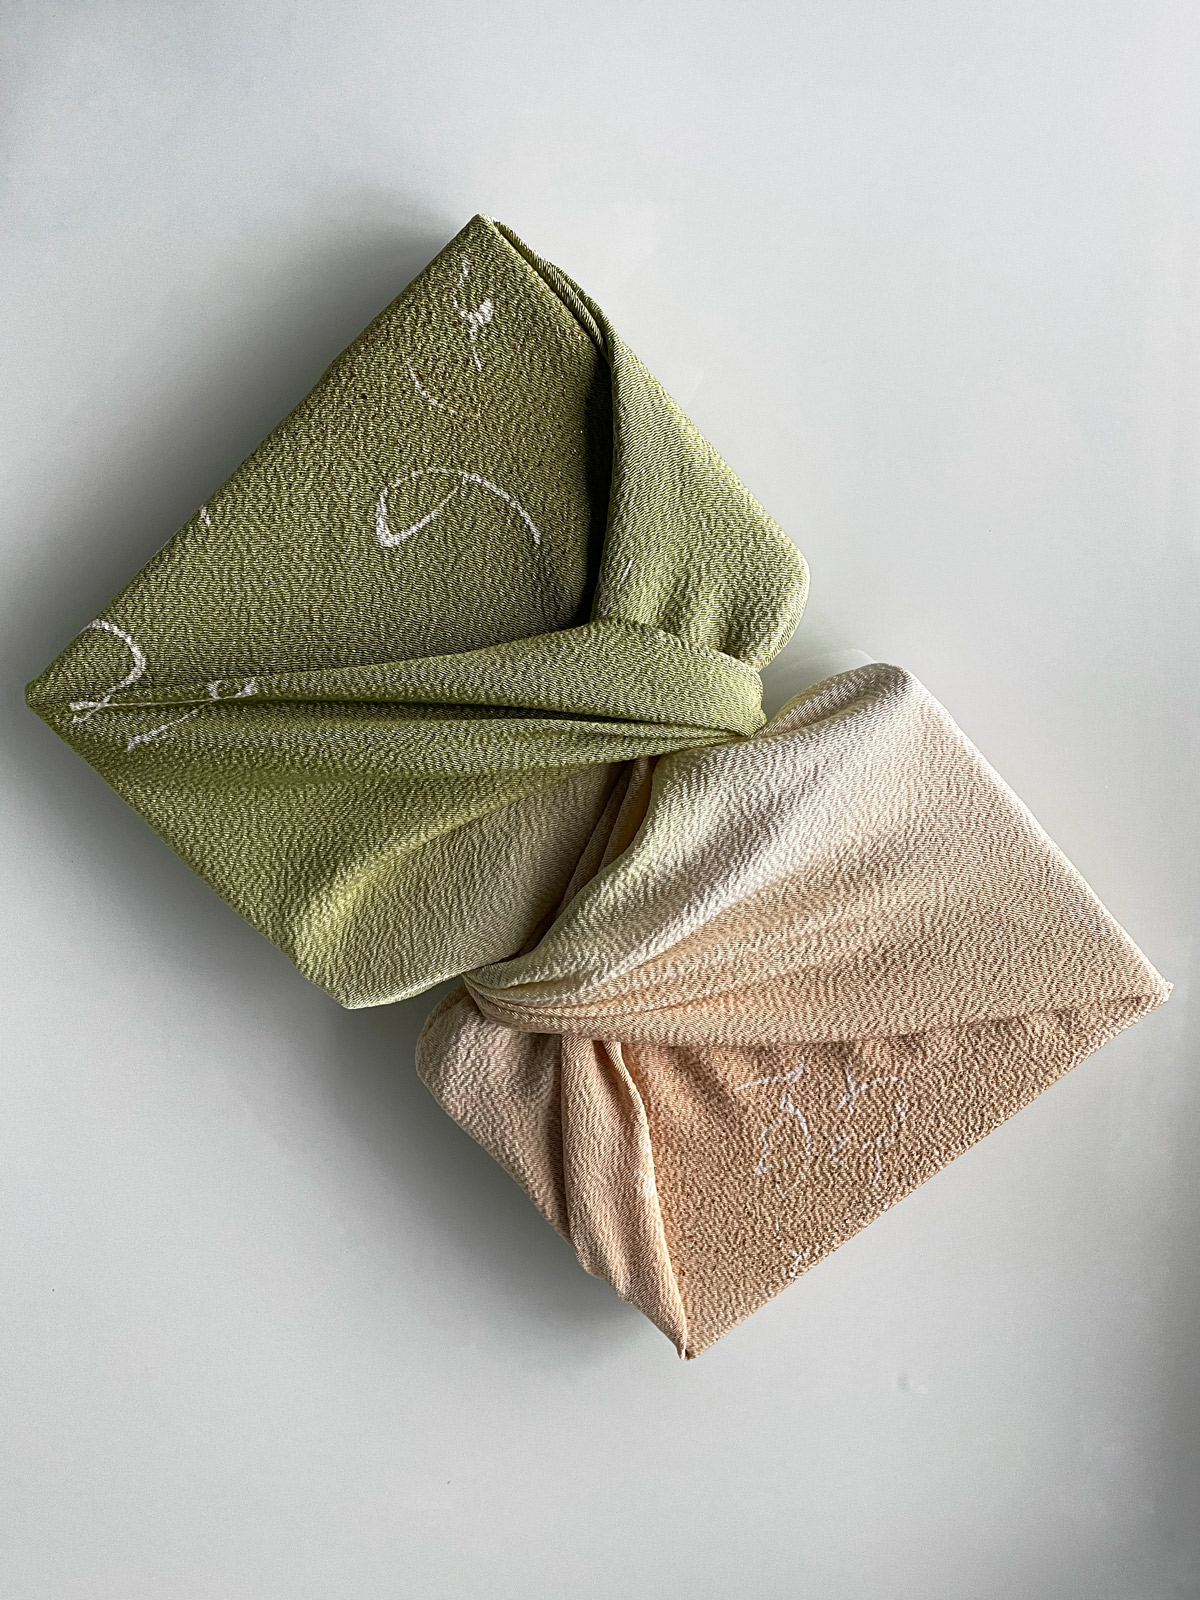 Silk Furoshiki in moss green and champagne color with beautiful calligraphy